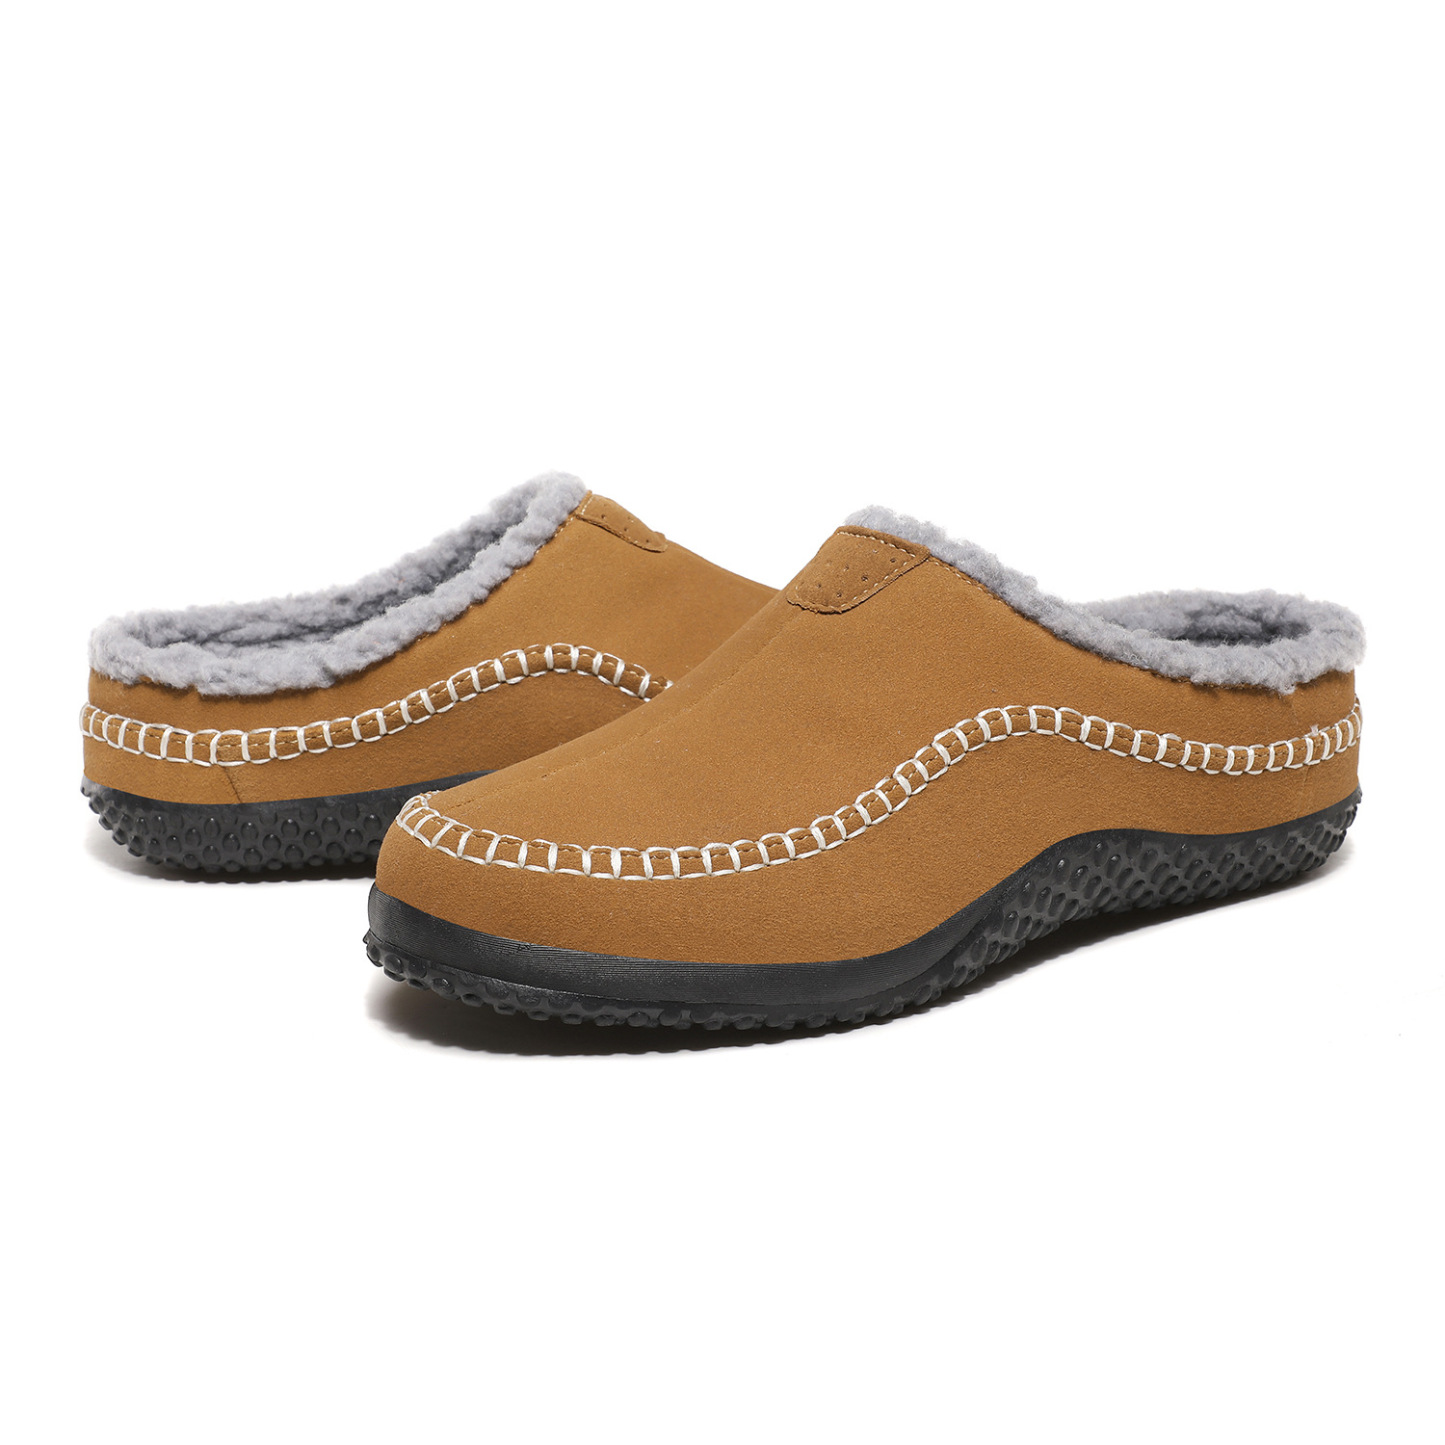 Warm Fuzzy Comfy House Shoes For Men